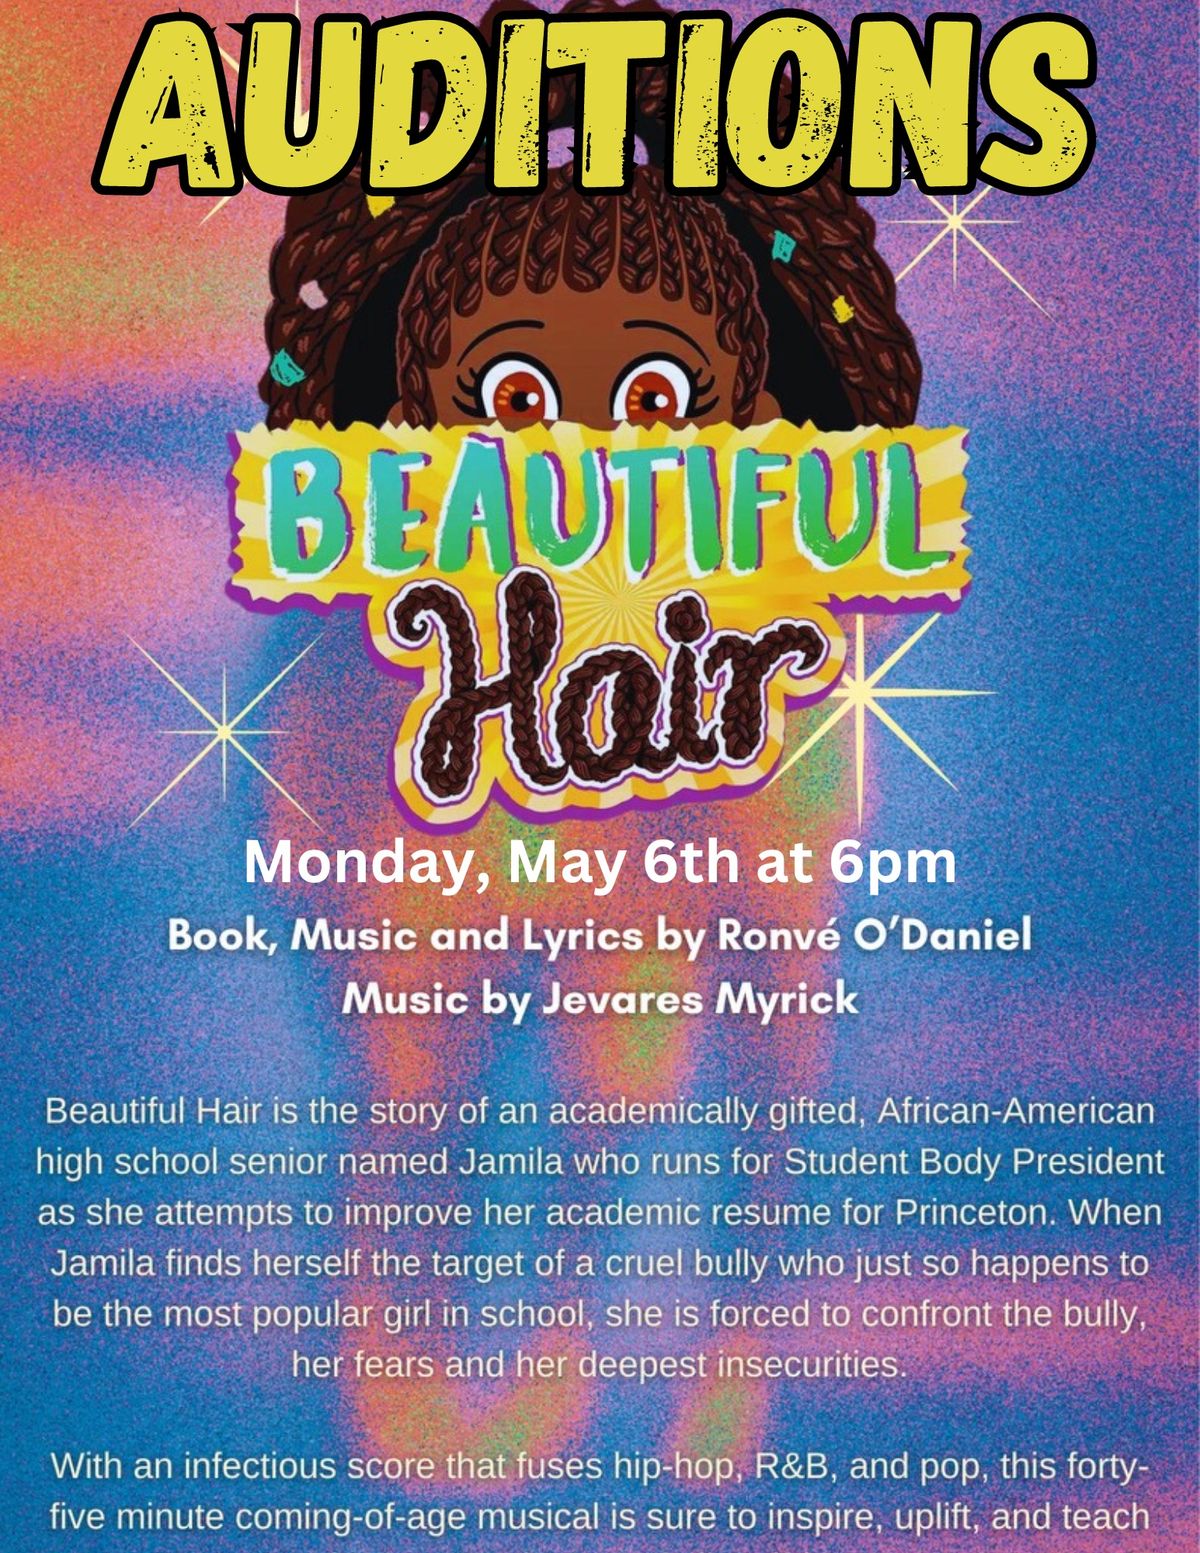 Beautiful Hair **AUDITIONS**